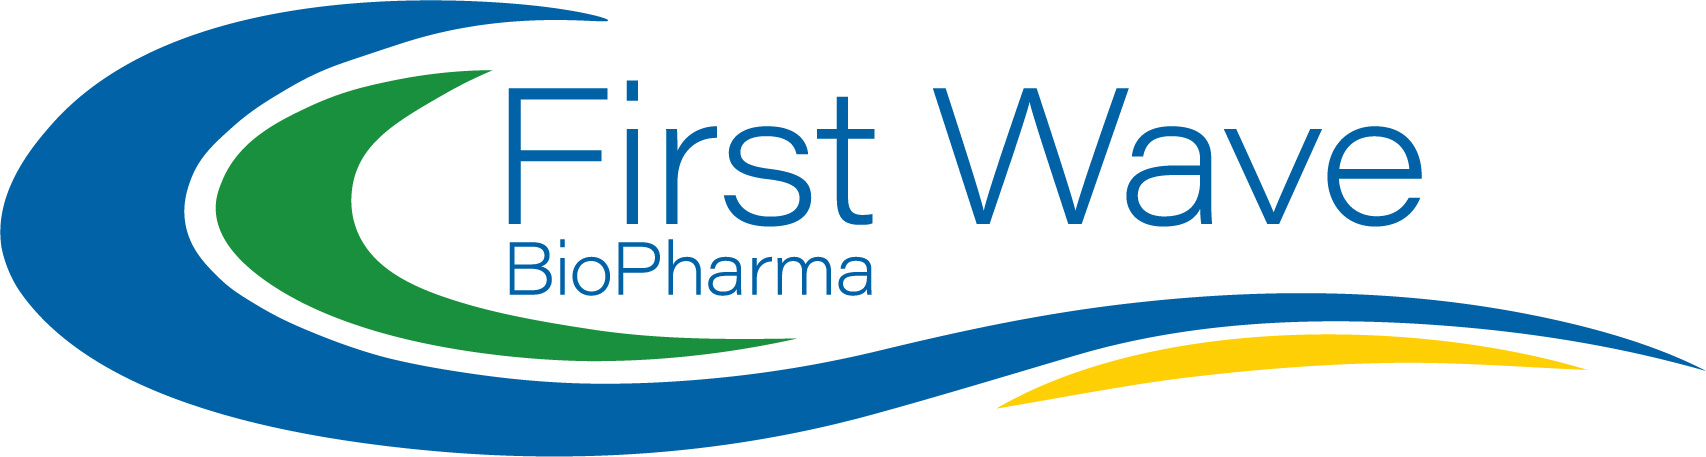 First Wave BioPharma Engages Rho to Manage Phase 2 Clinical Trial of Enhanced Adrulipase Formulation